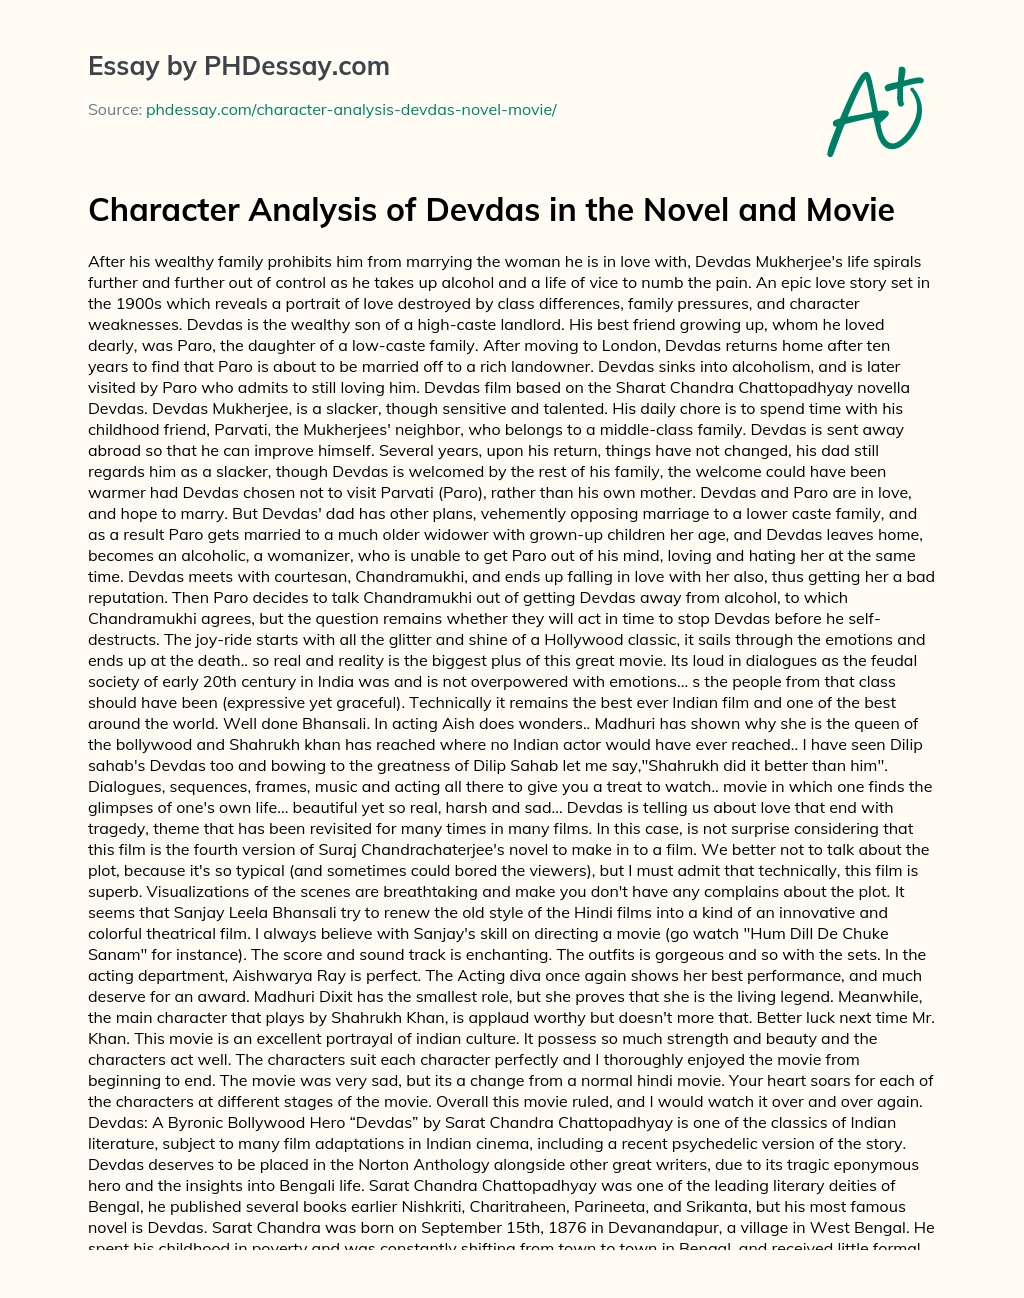 Character Analysis of Devdas in the Novel and Movie essay